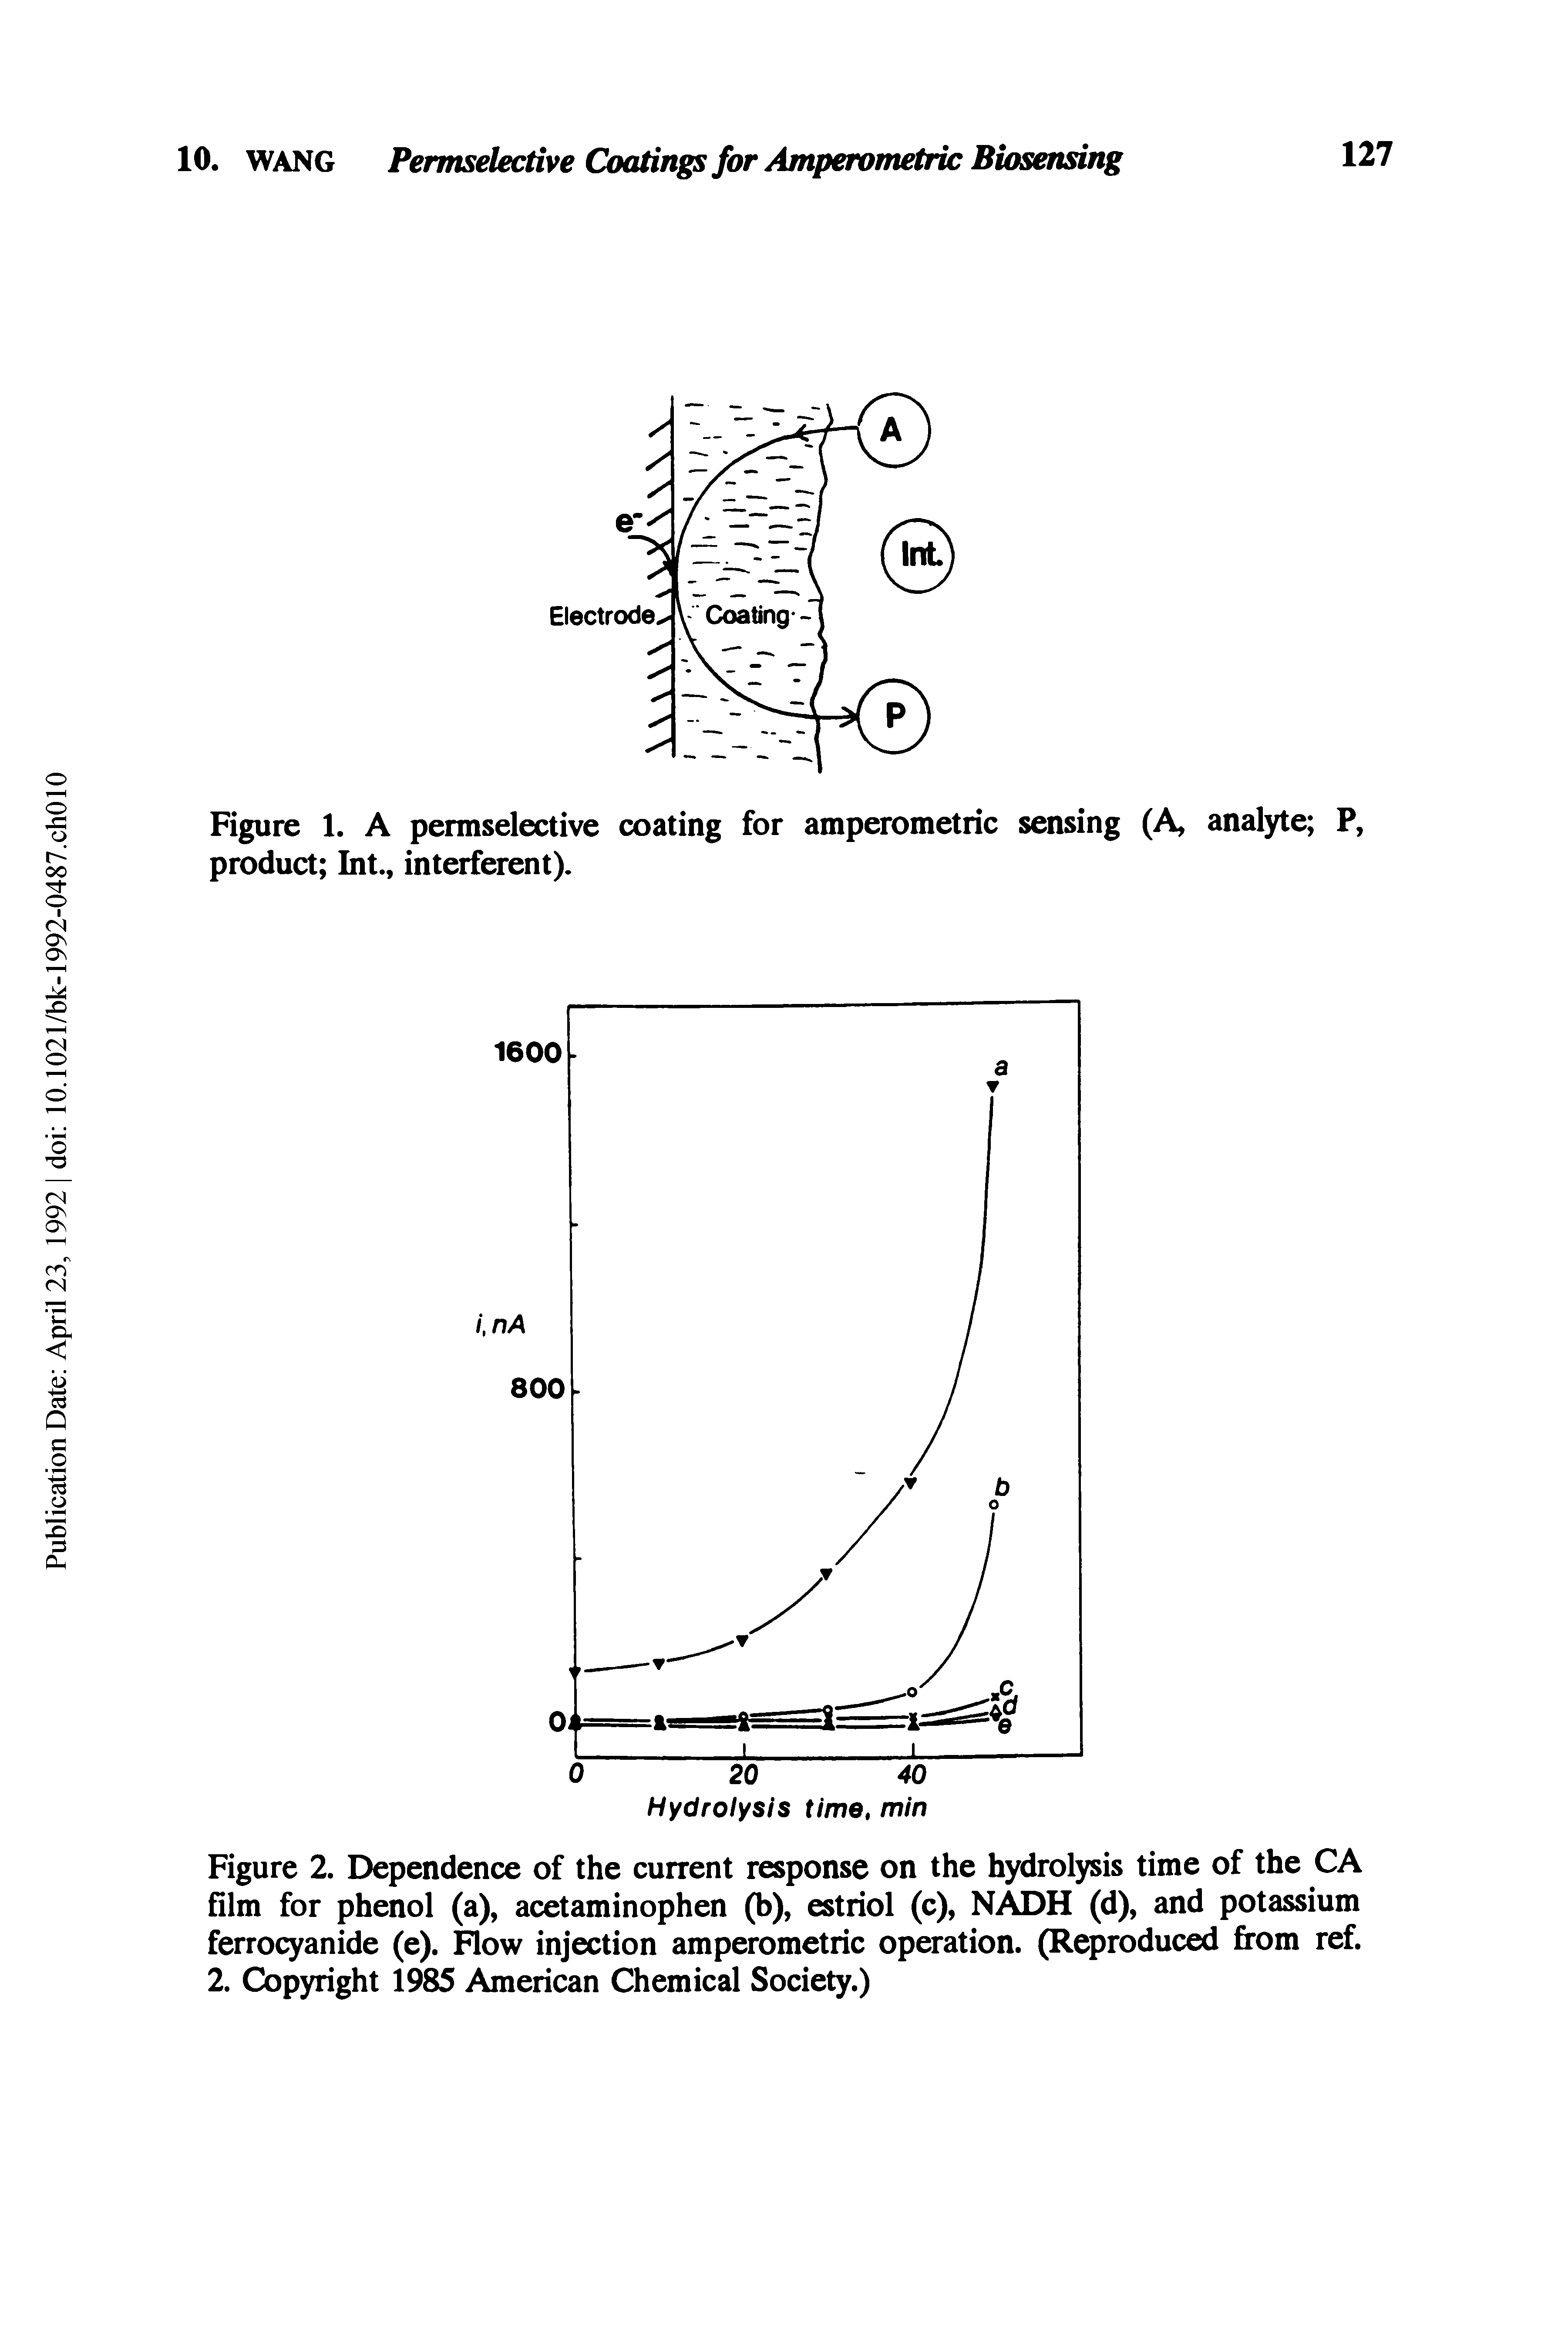 Figure 1. A permselective coating for amperometric sensing (A, analyte P, product Int., interferent).